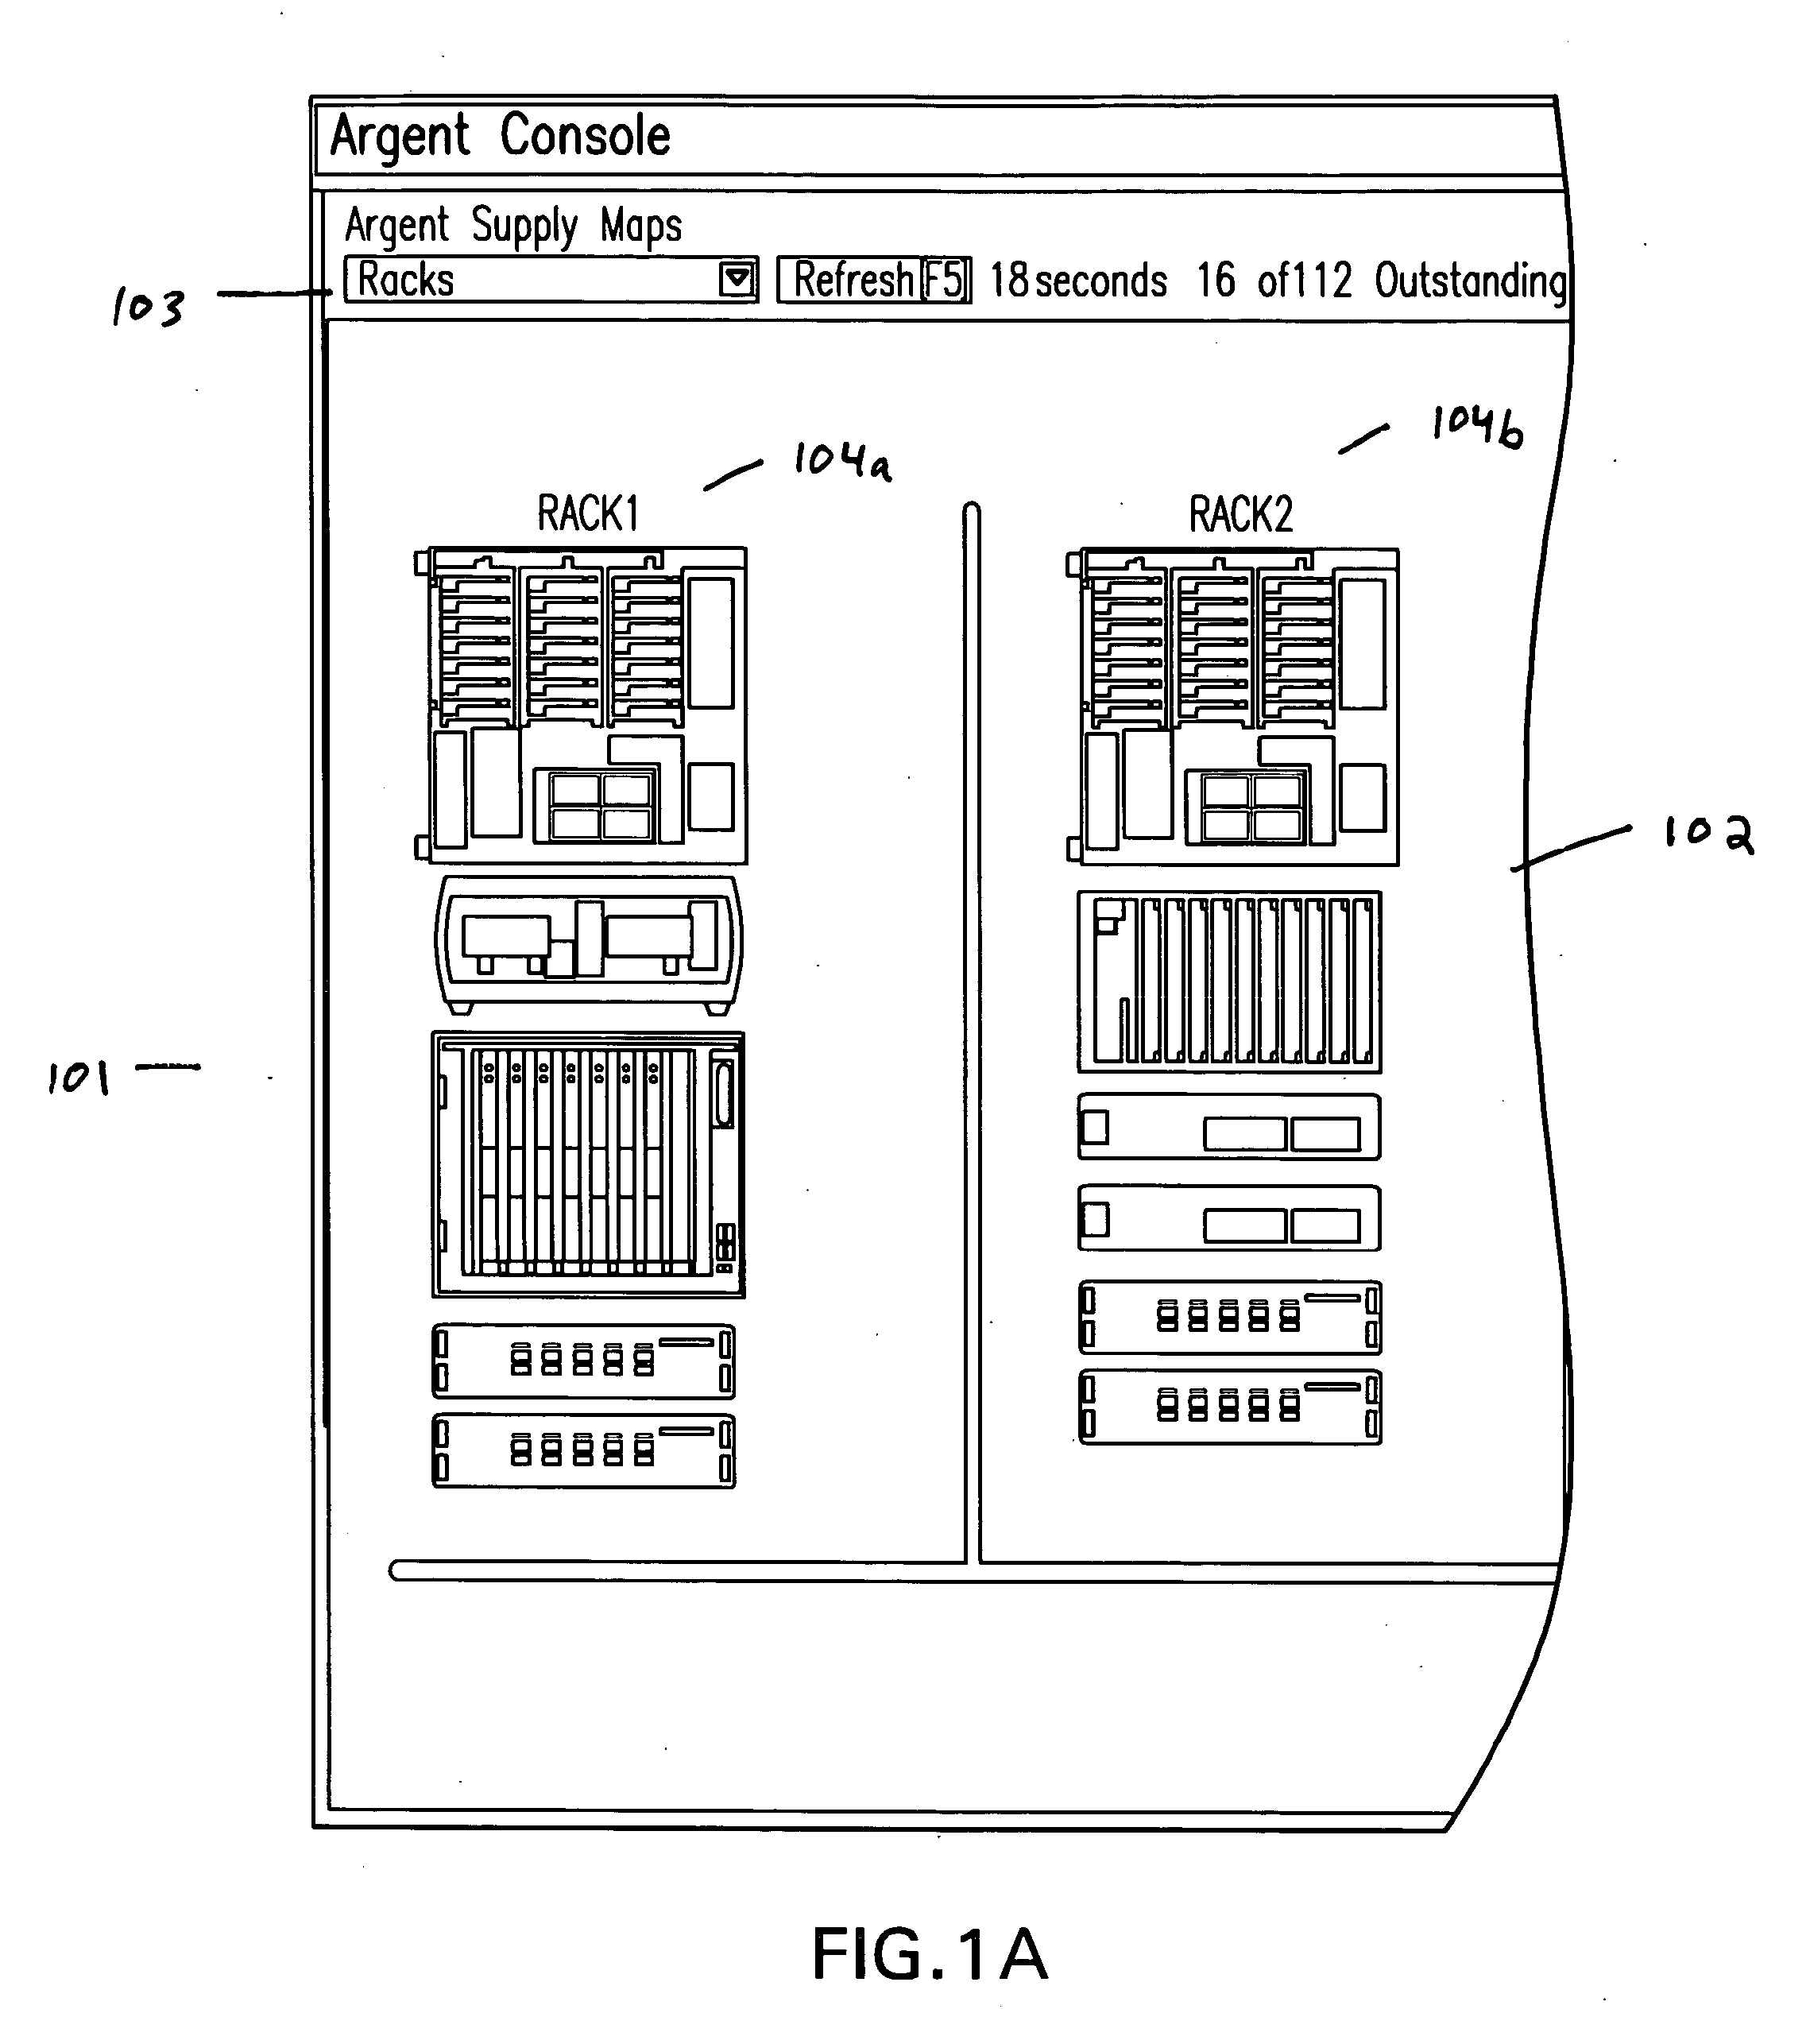 Method and system for defining media objects for computer network monitoring